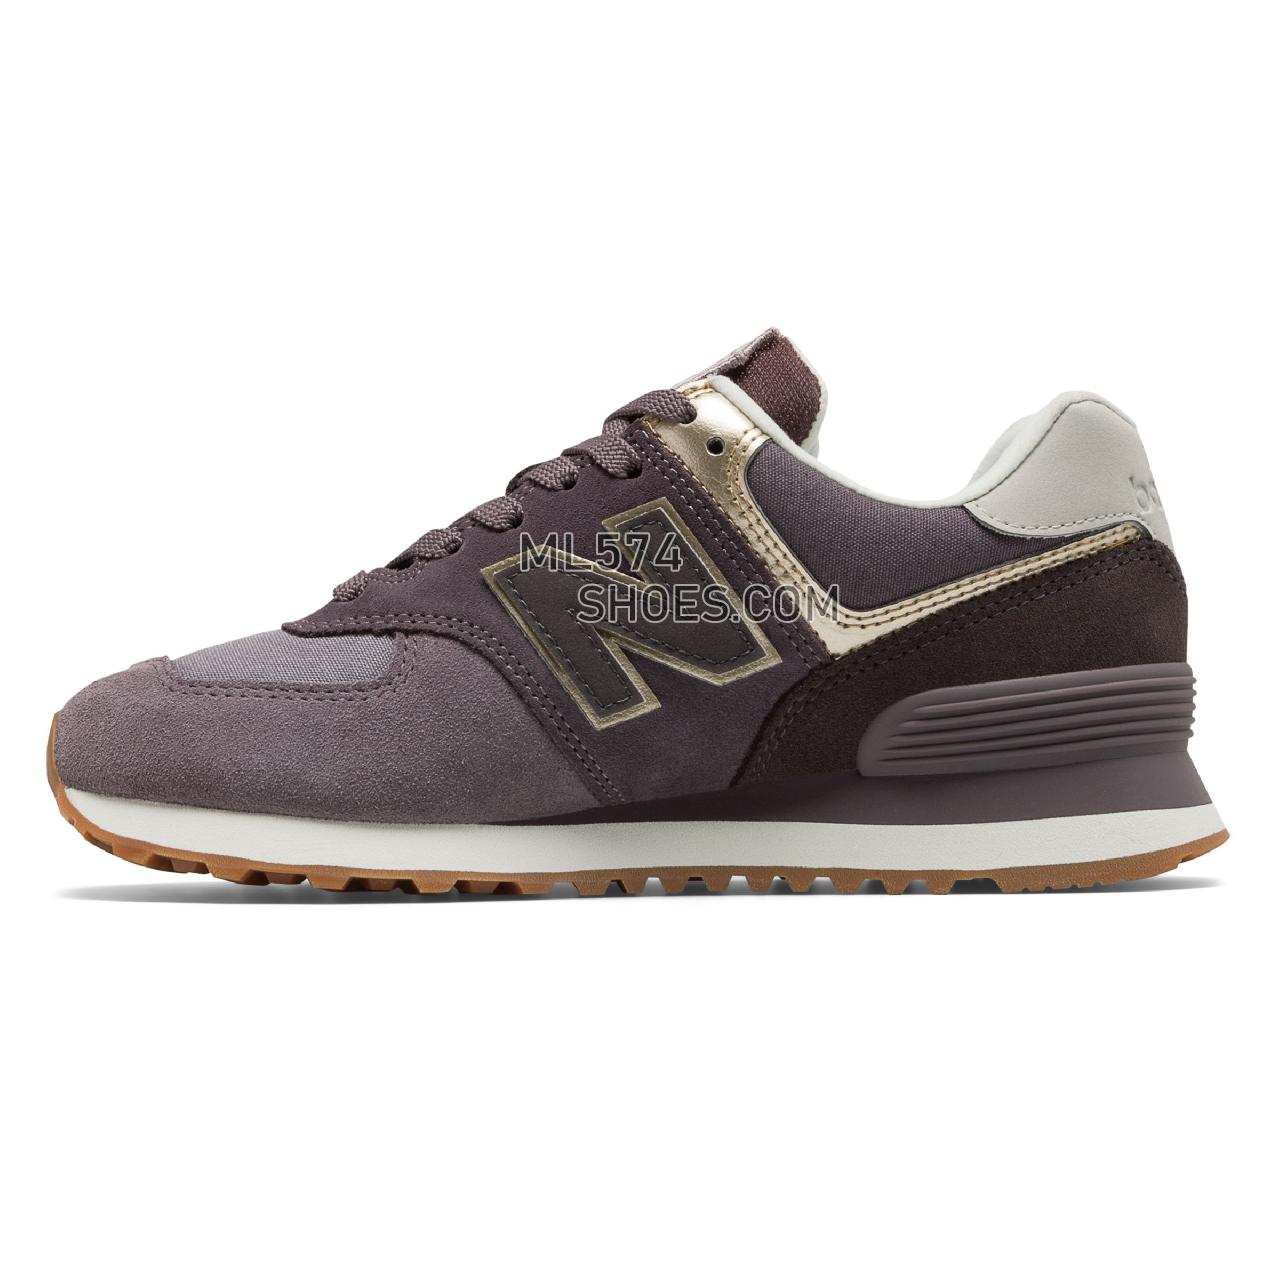 New Balance 574 Metallic Patch - Women's Classic Sneakers - Dark Cashmere with Light Gold - WL574MLB